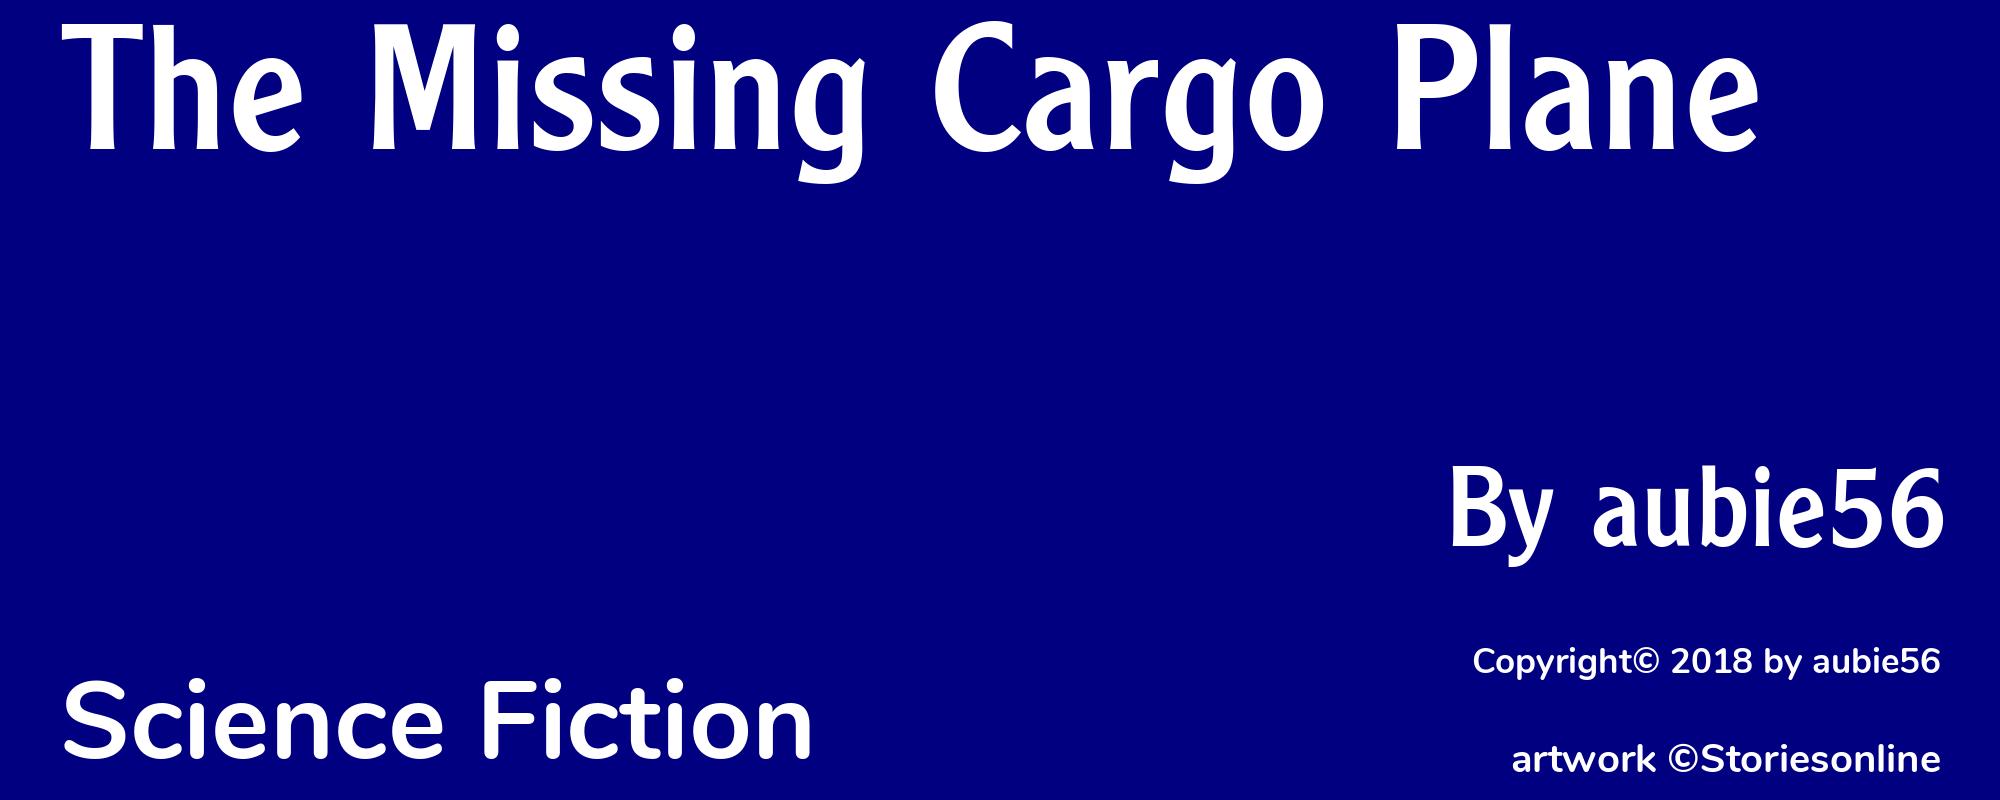 The Missing Cargo Plane - Cover